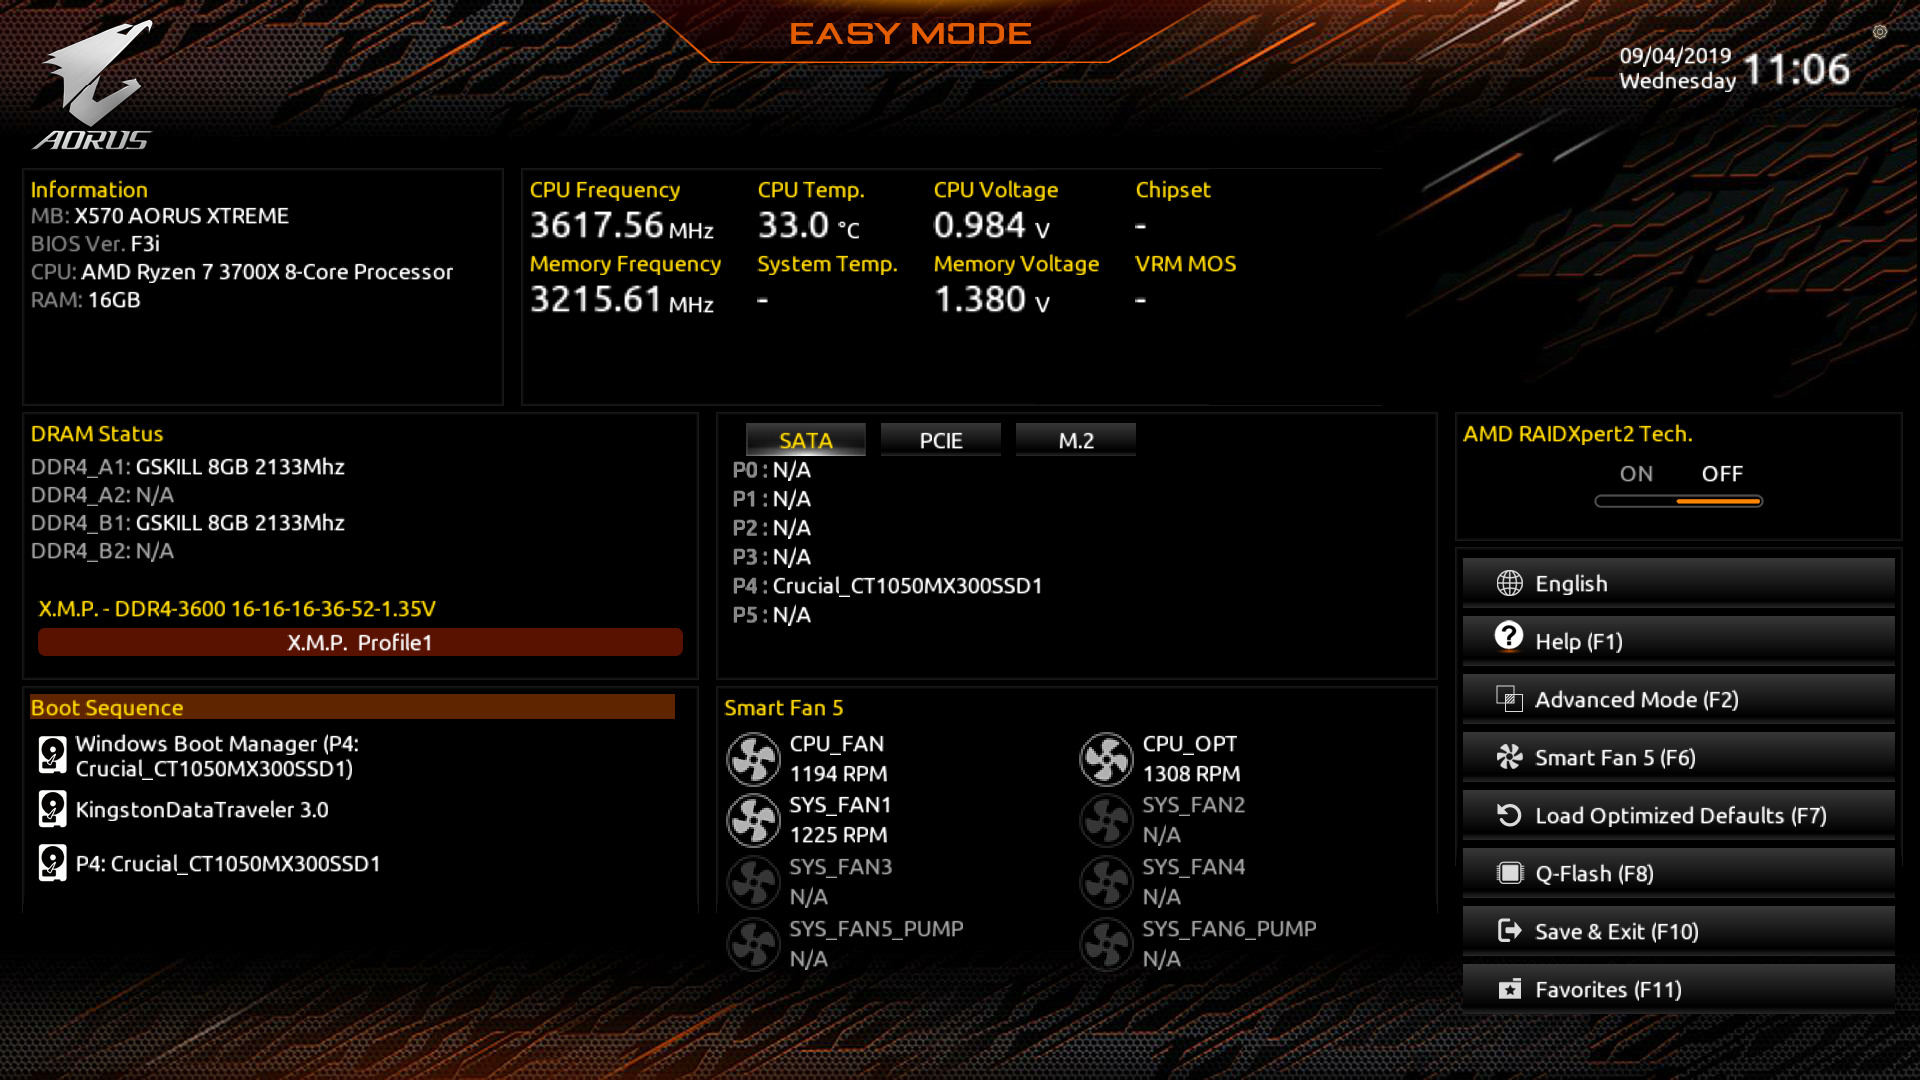 Bios And Software The Gigabyte X570 Aorus Xtreme Motherboard Review Fanless Am4